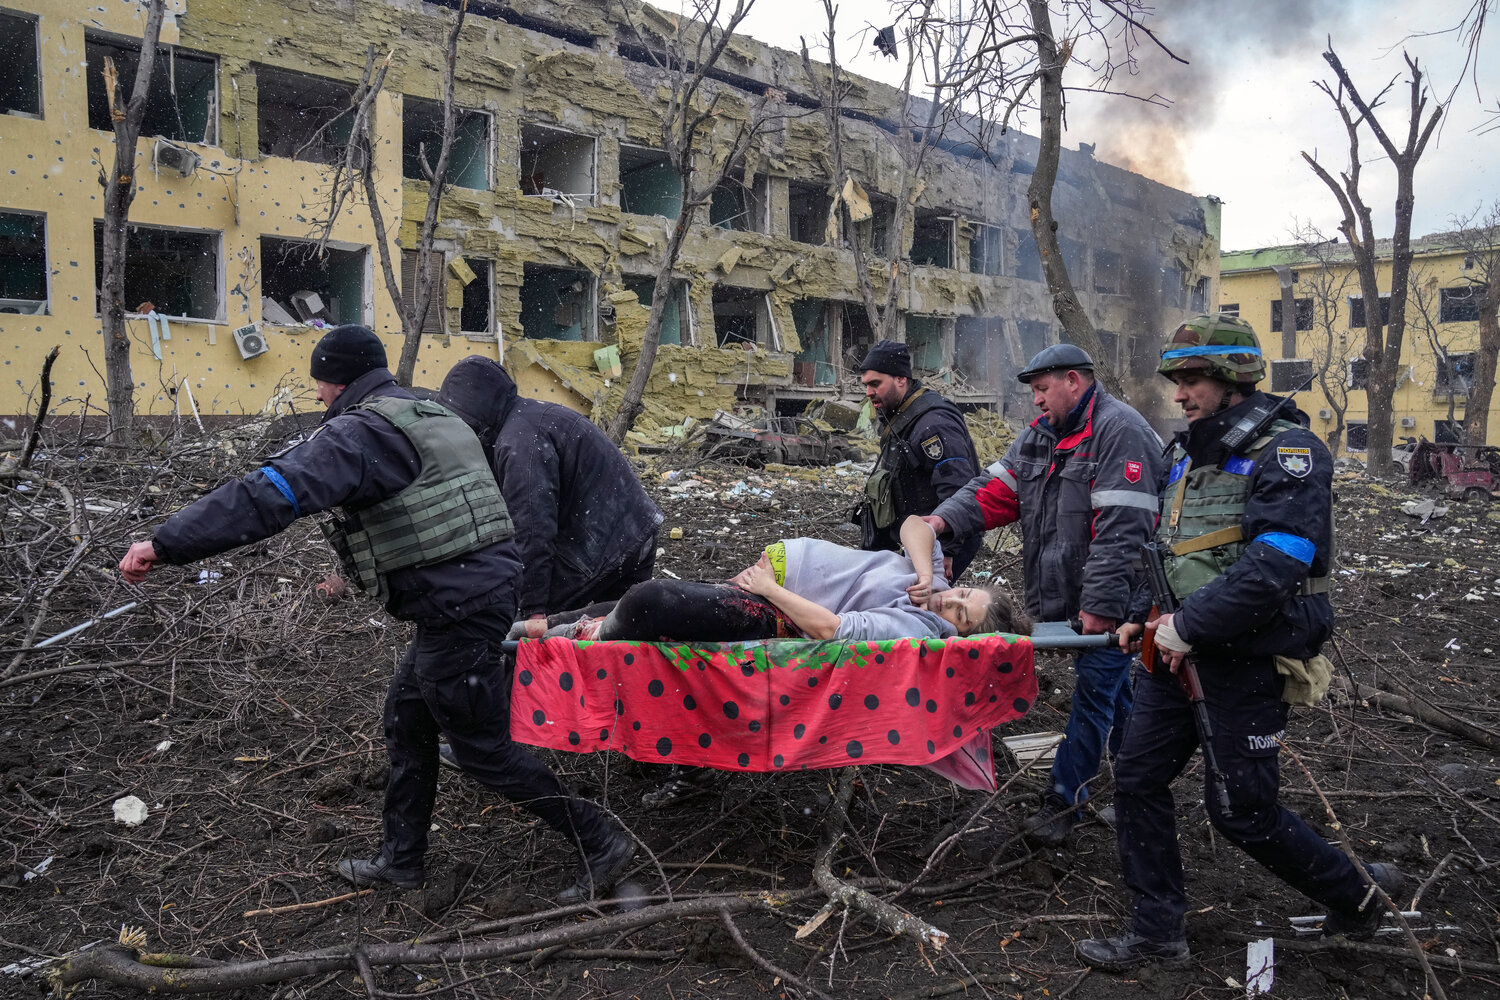 The AP won last year’s Pulitzer Prize for public service, for reporting from Mariupol, Ukraine, including this image of a pregnant woman being evacuated from a maternity hospital that was damaged by a Russian airstrike. (Evgeniy Maloletka / AP, 2022)